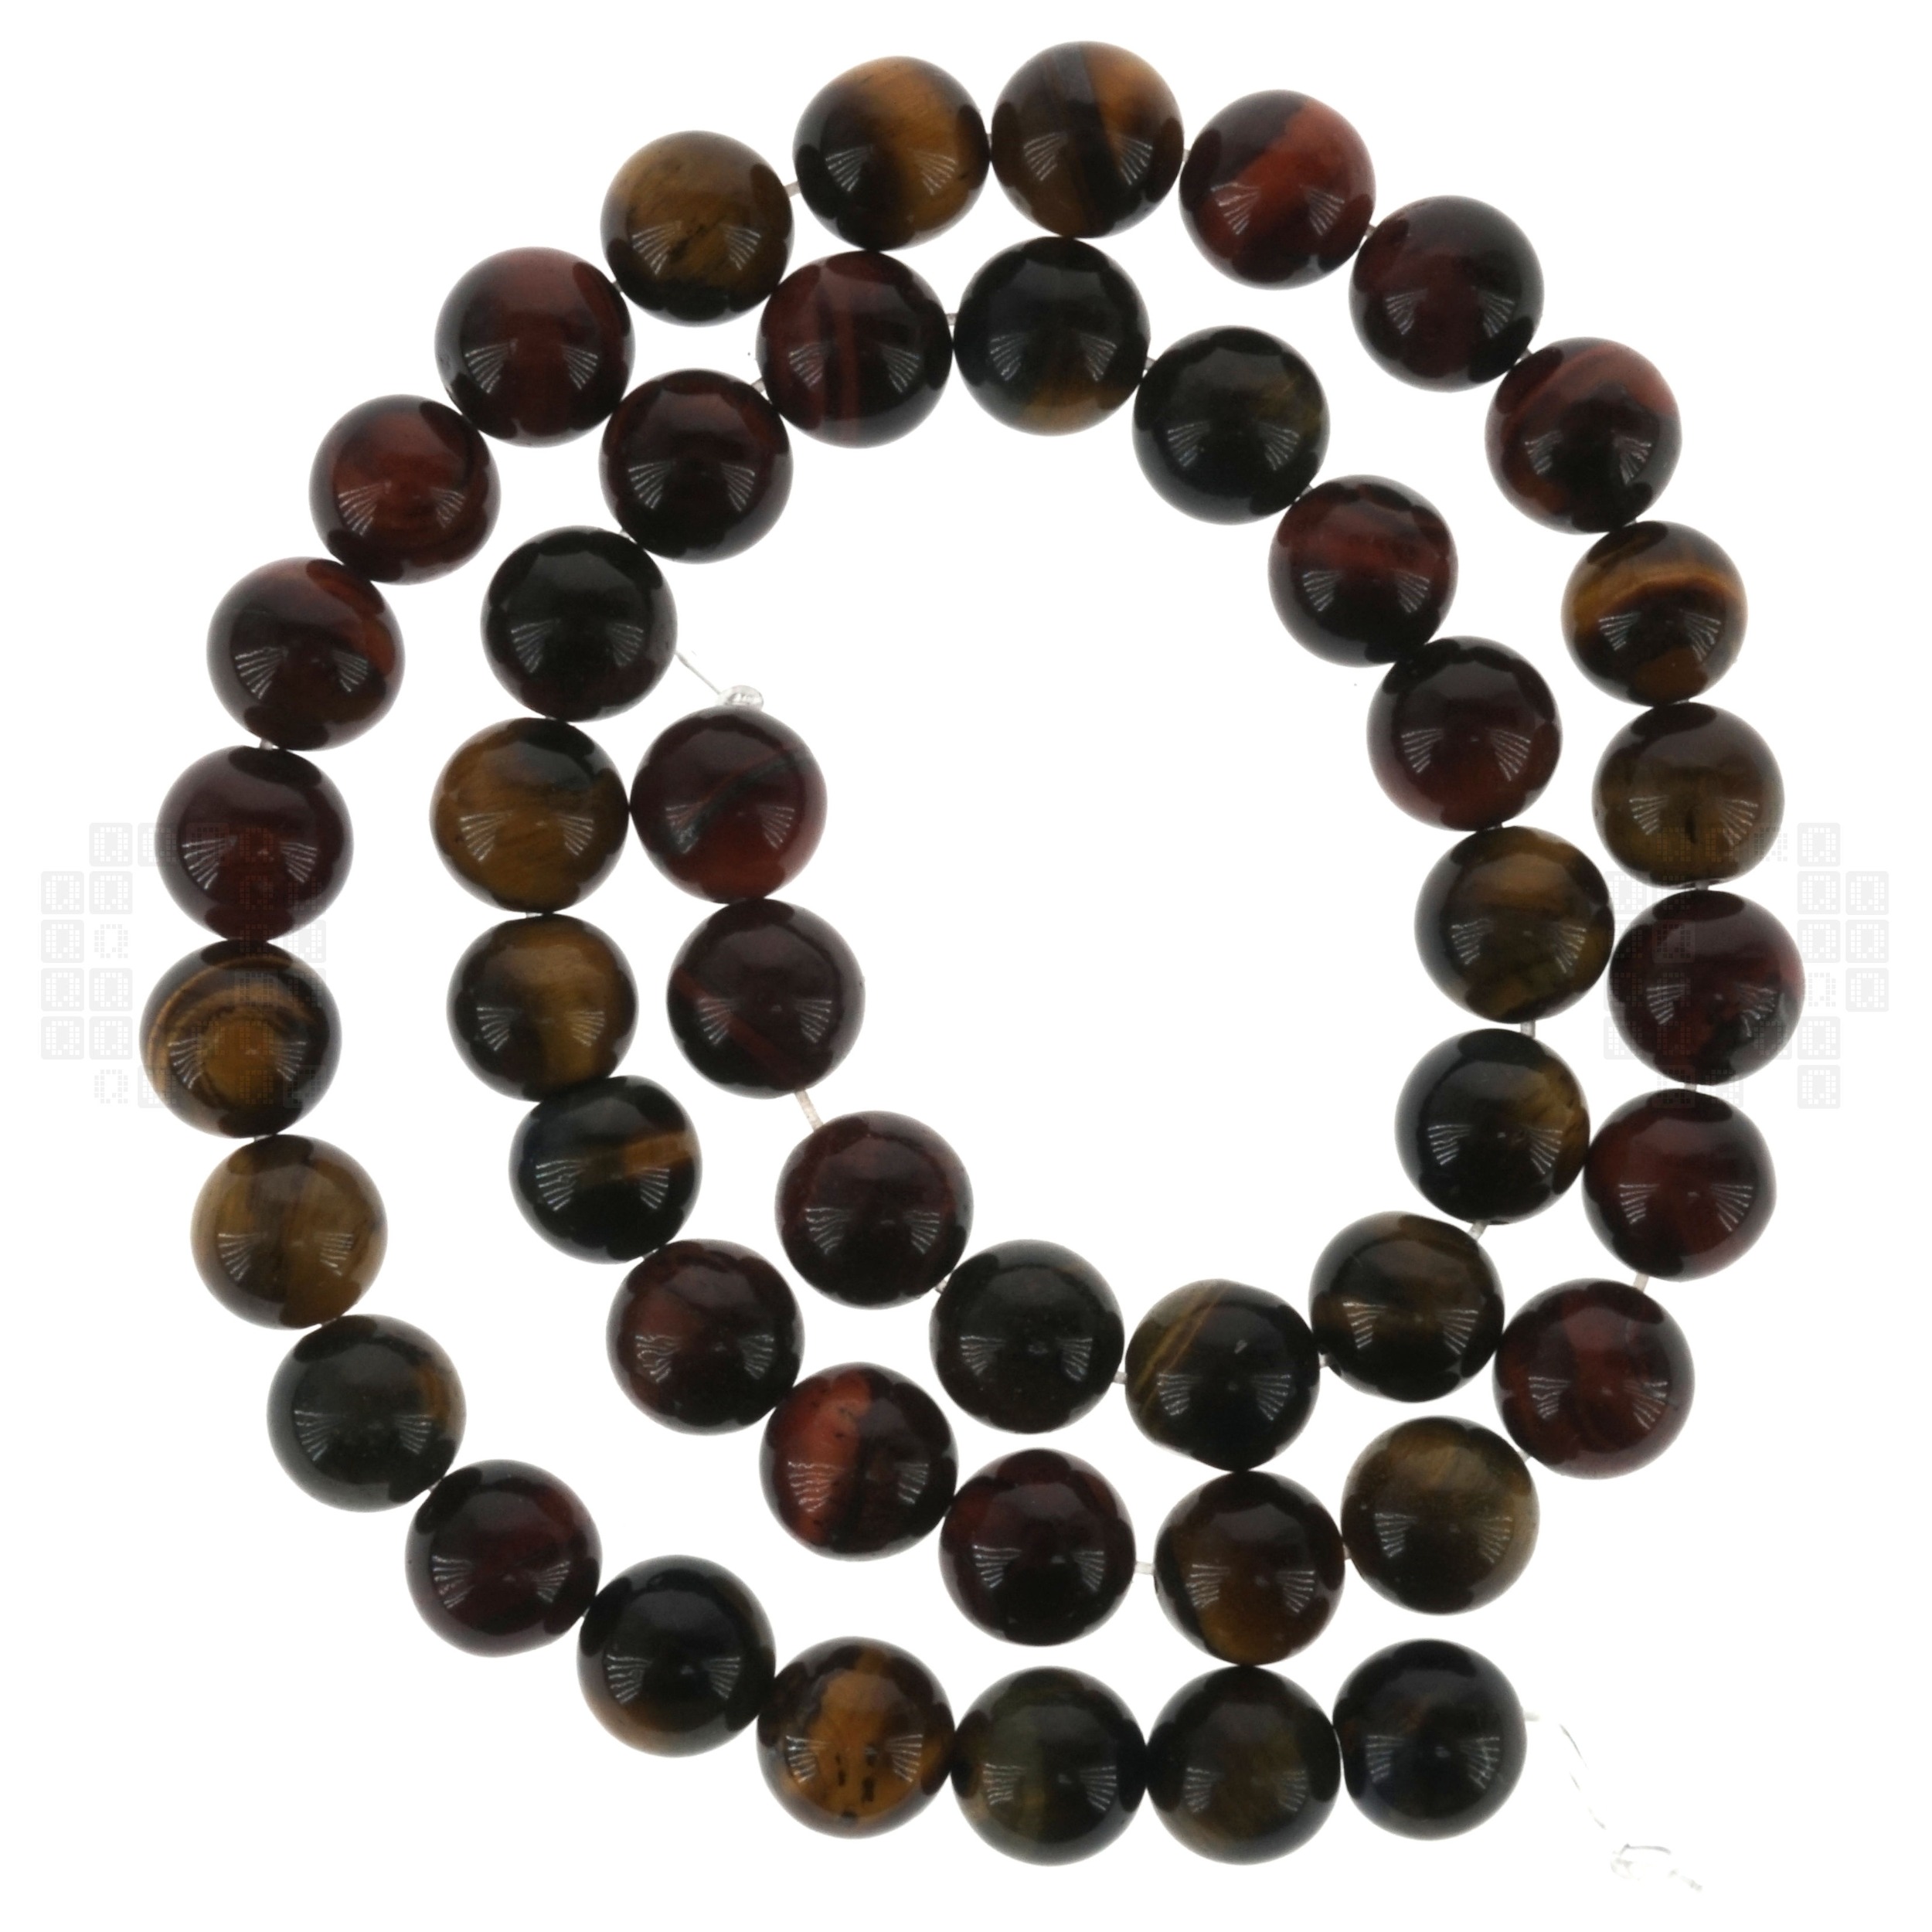 Color Tiger Eye 8mm Round Beads, 45 Pieces